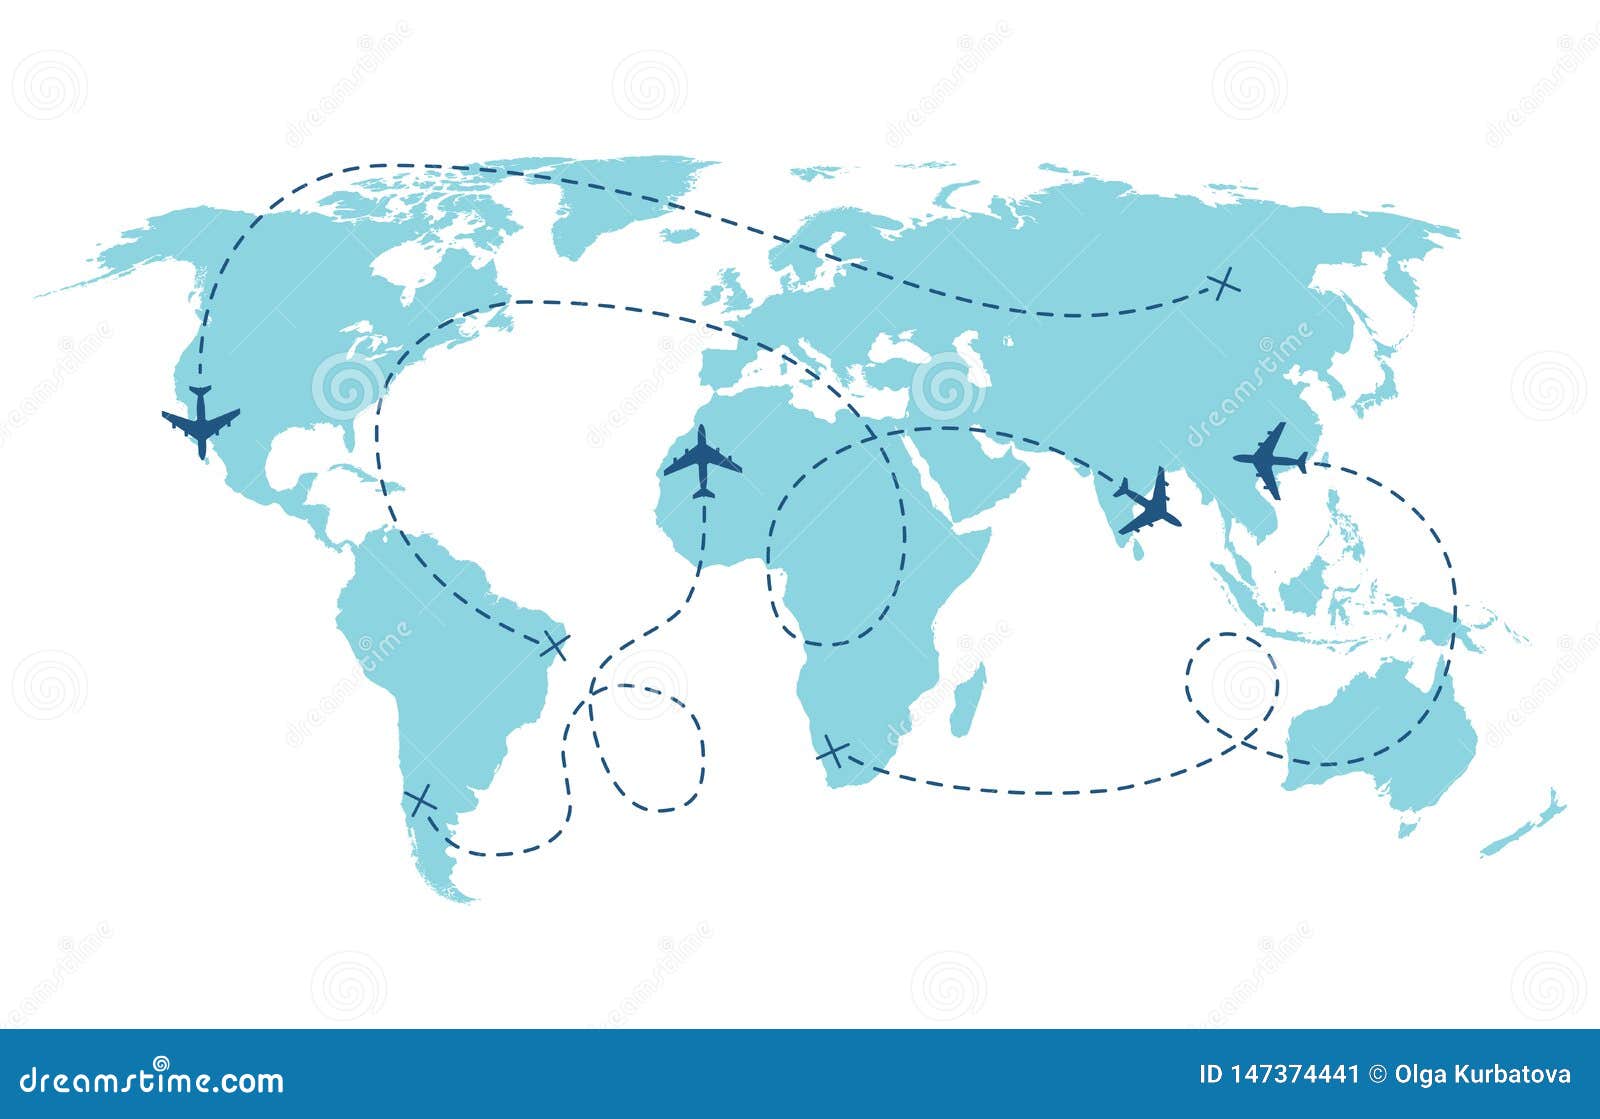 airplane route. plane trace line, aeroplanes pathways flight lines, planning routes travels pointers traffic track path